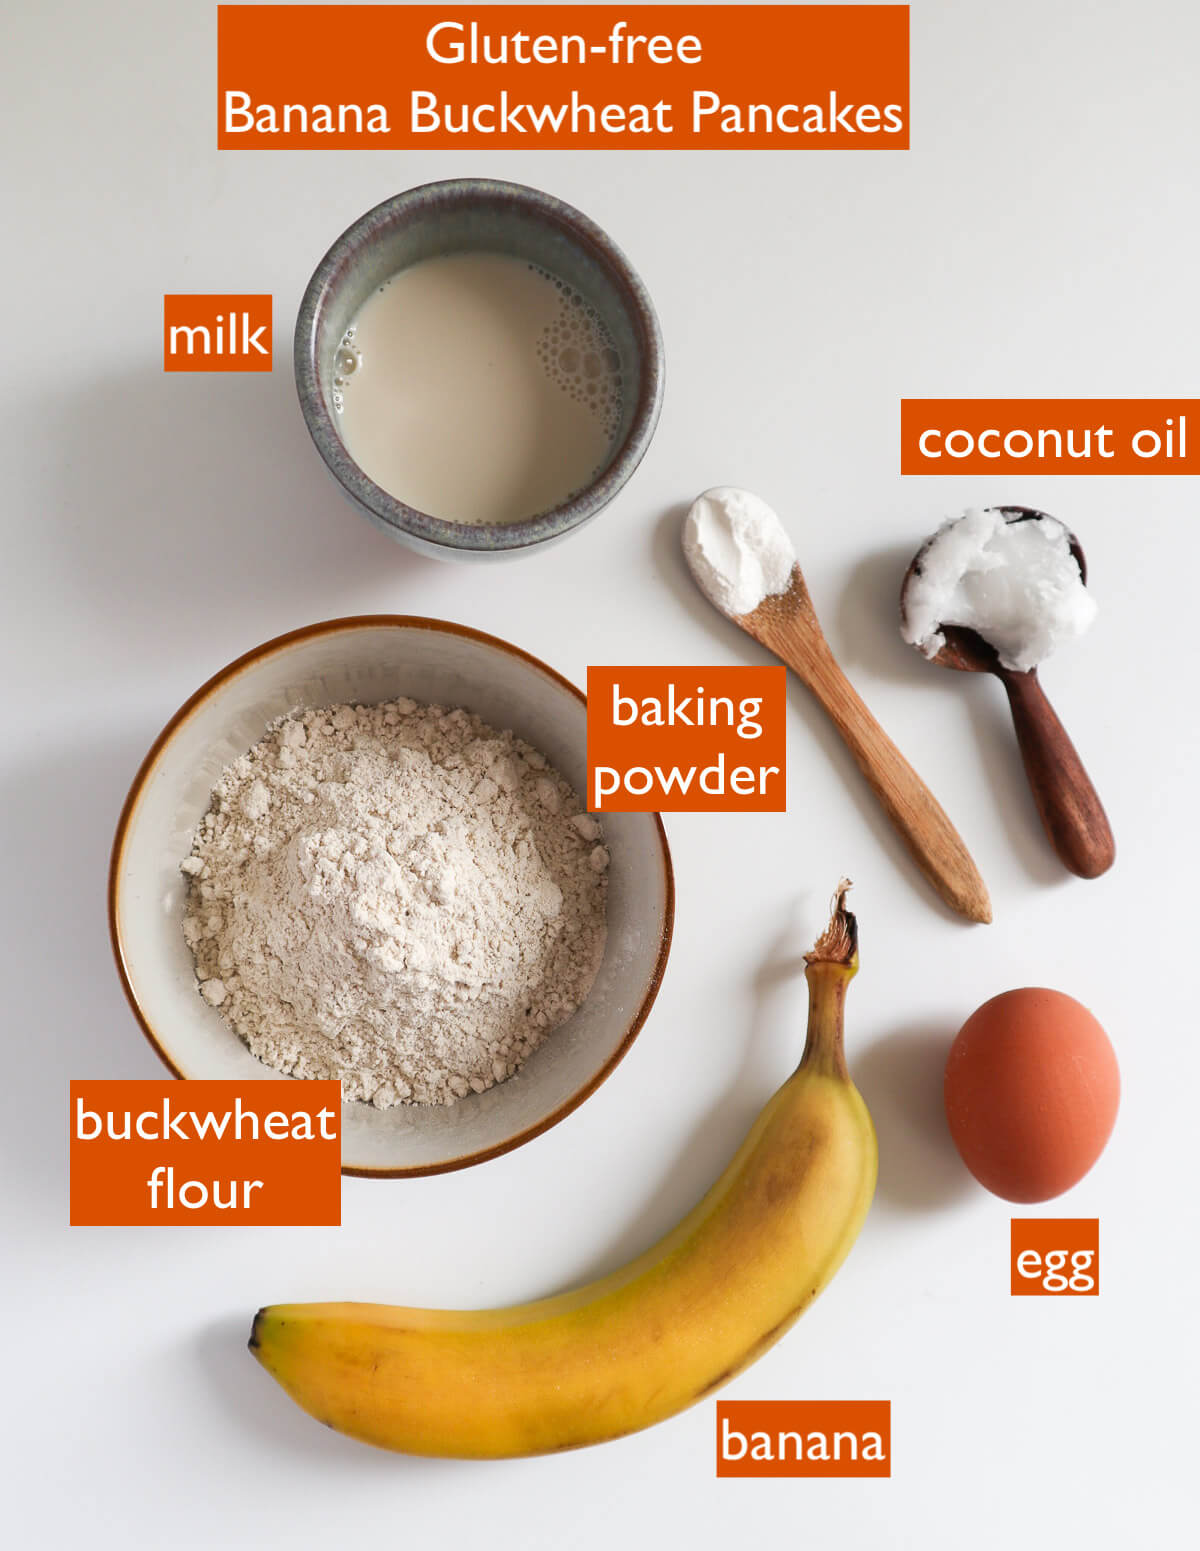 Labelled ingredients on a white background.